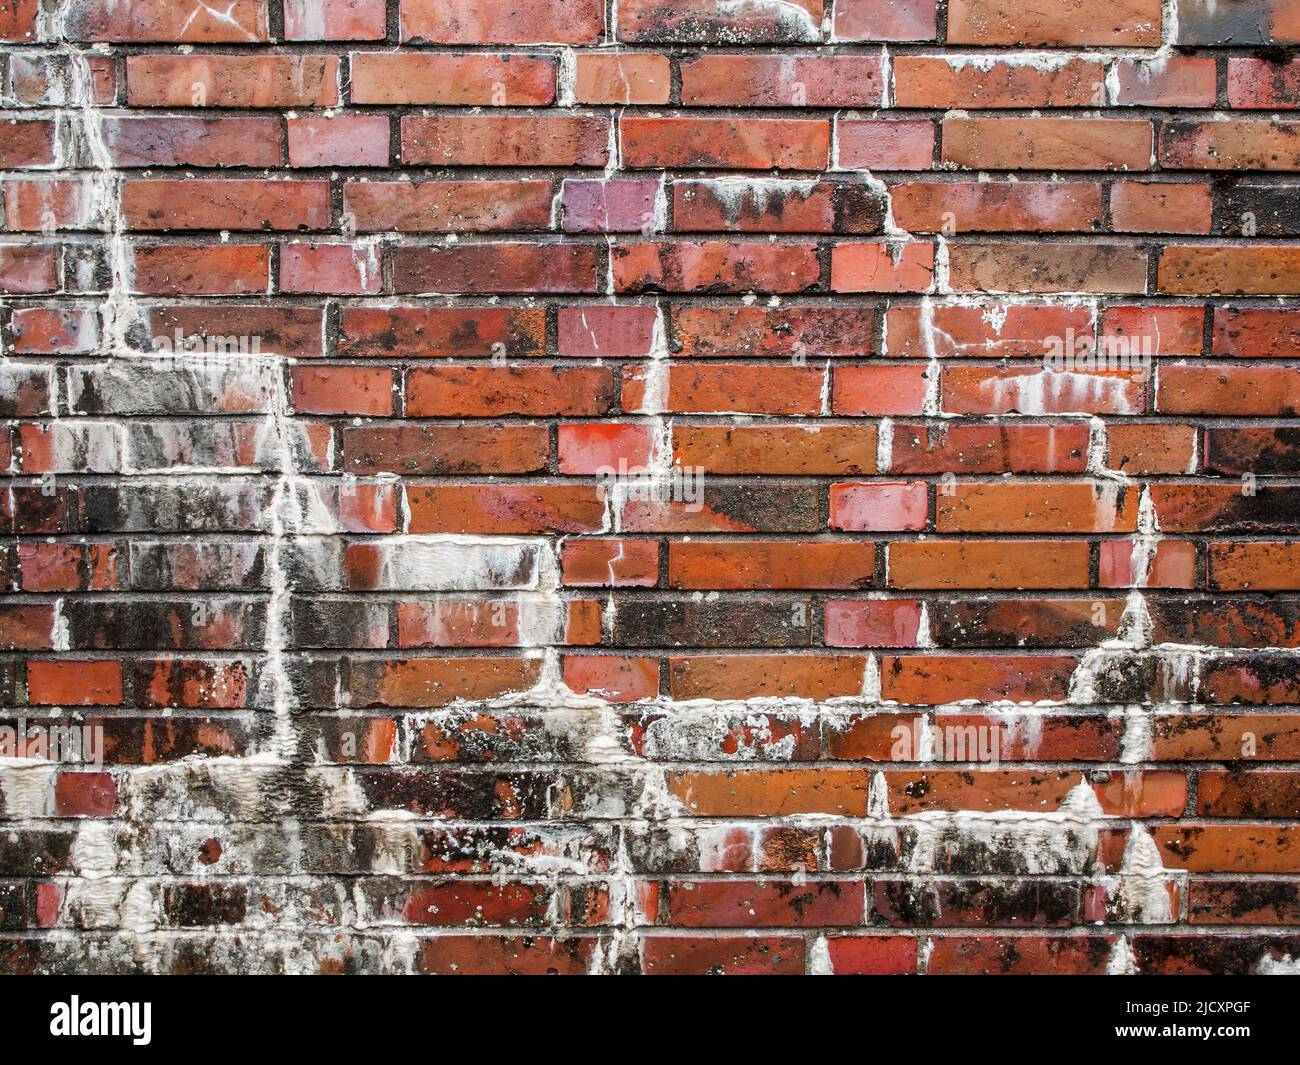 Full-frame view of a rain-soaked brick wall with efflorescence. Stock Photo